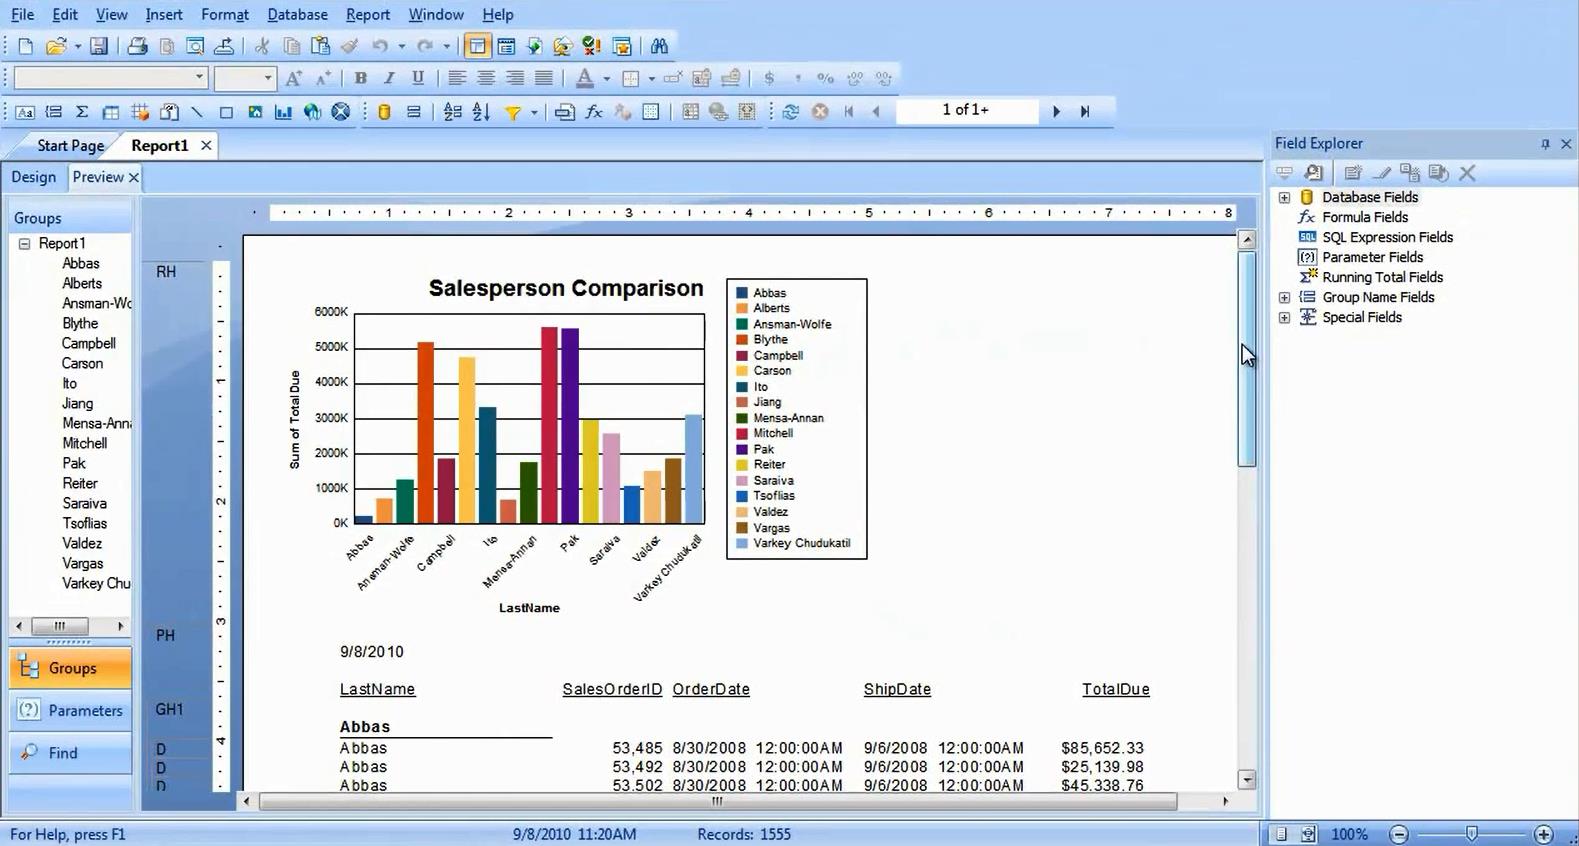 Crystal Reports 9 Full (download Or Descarga)